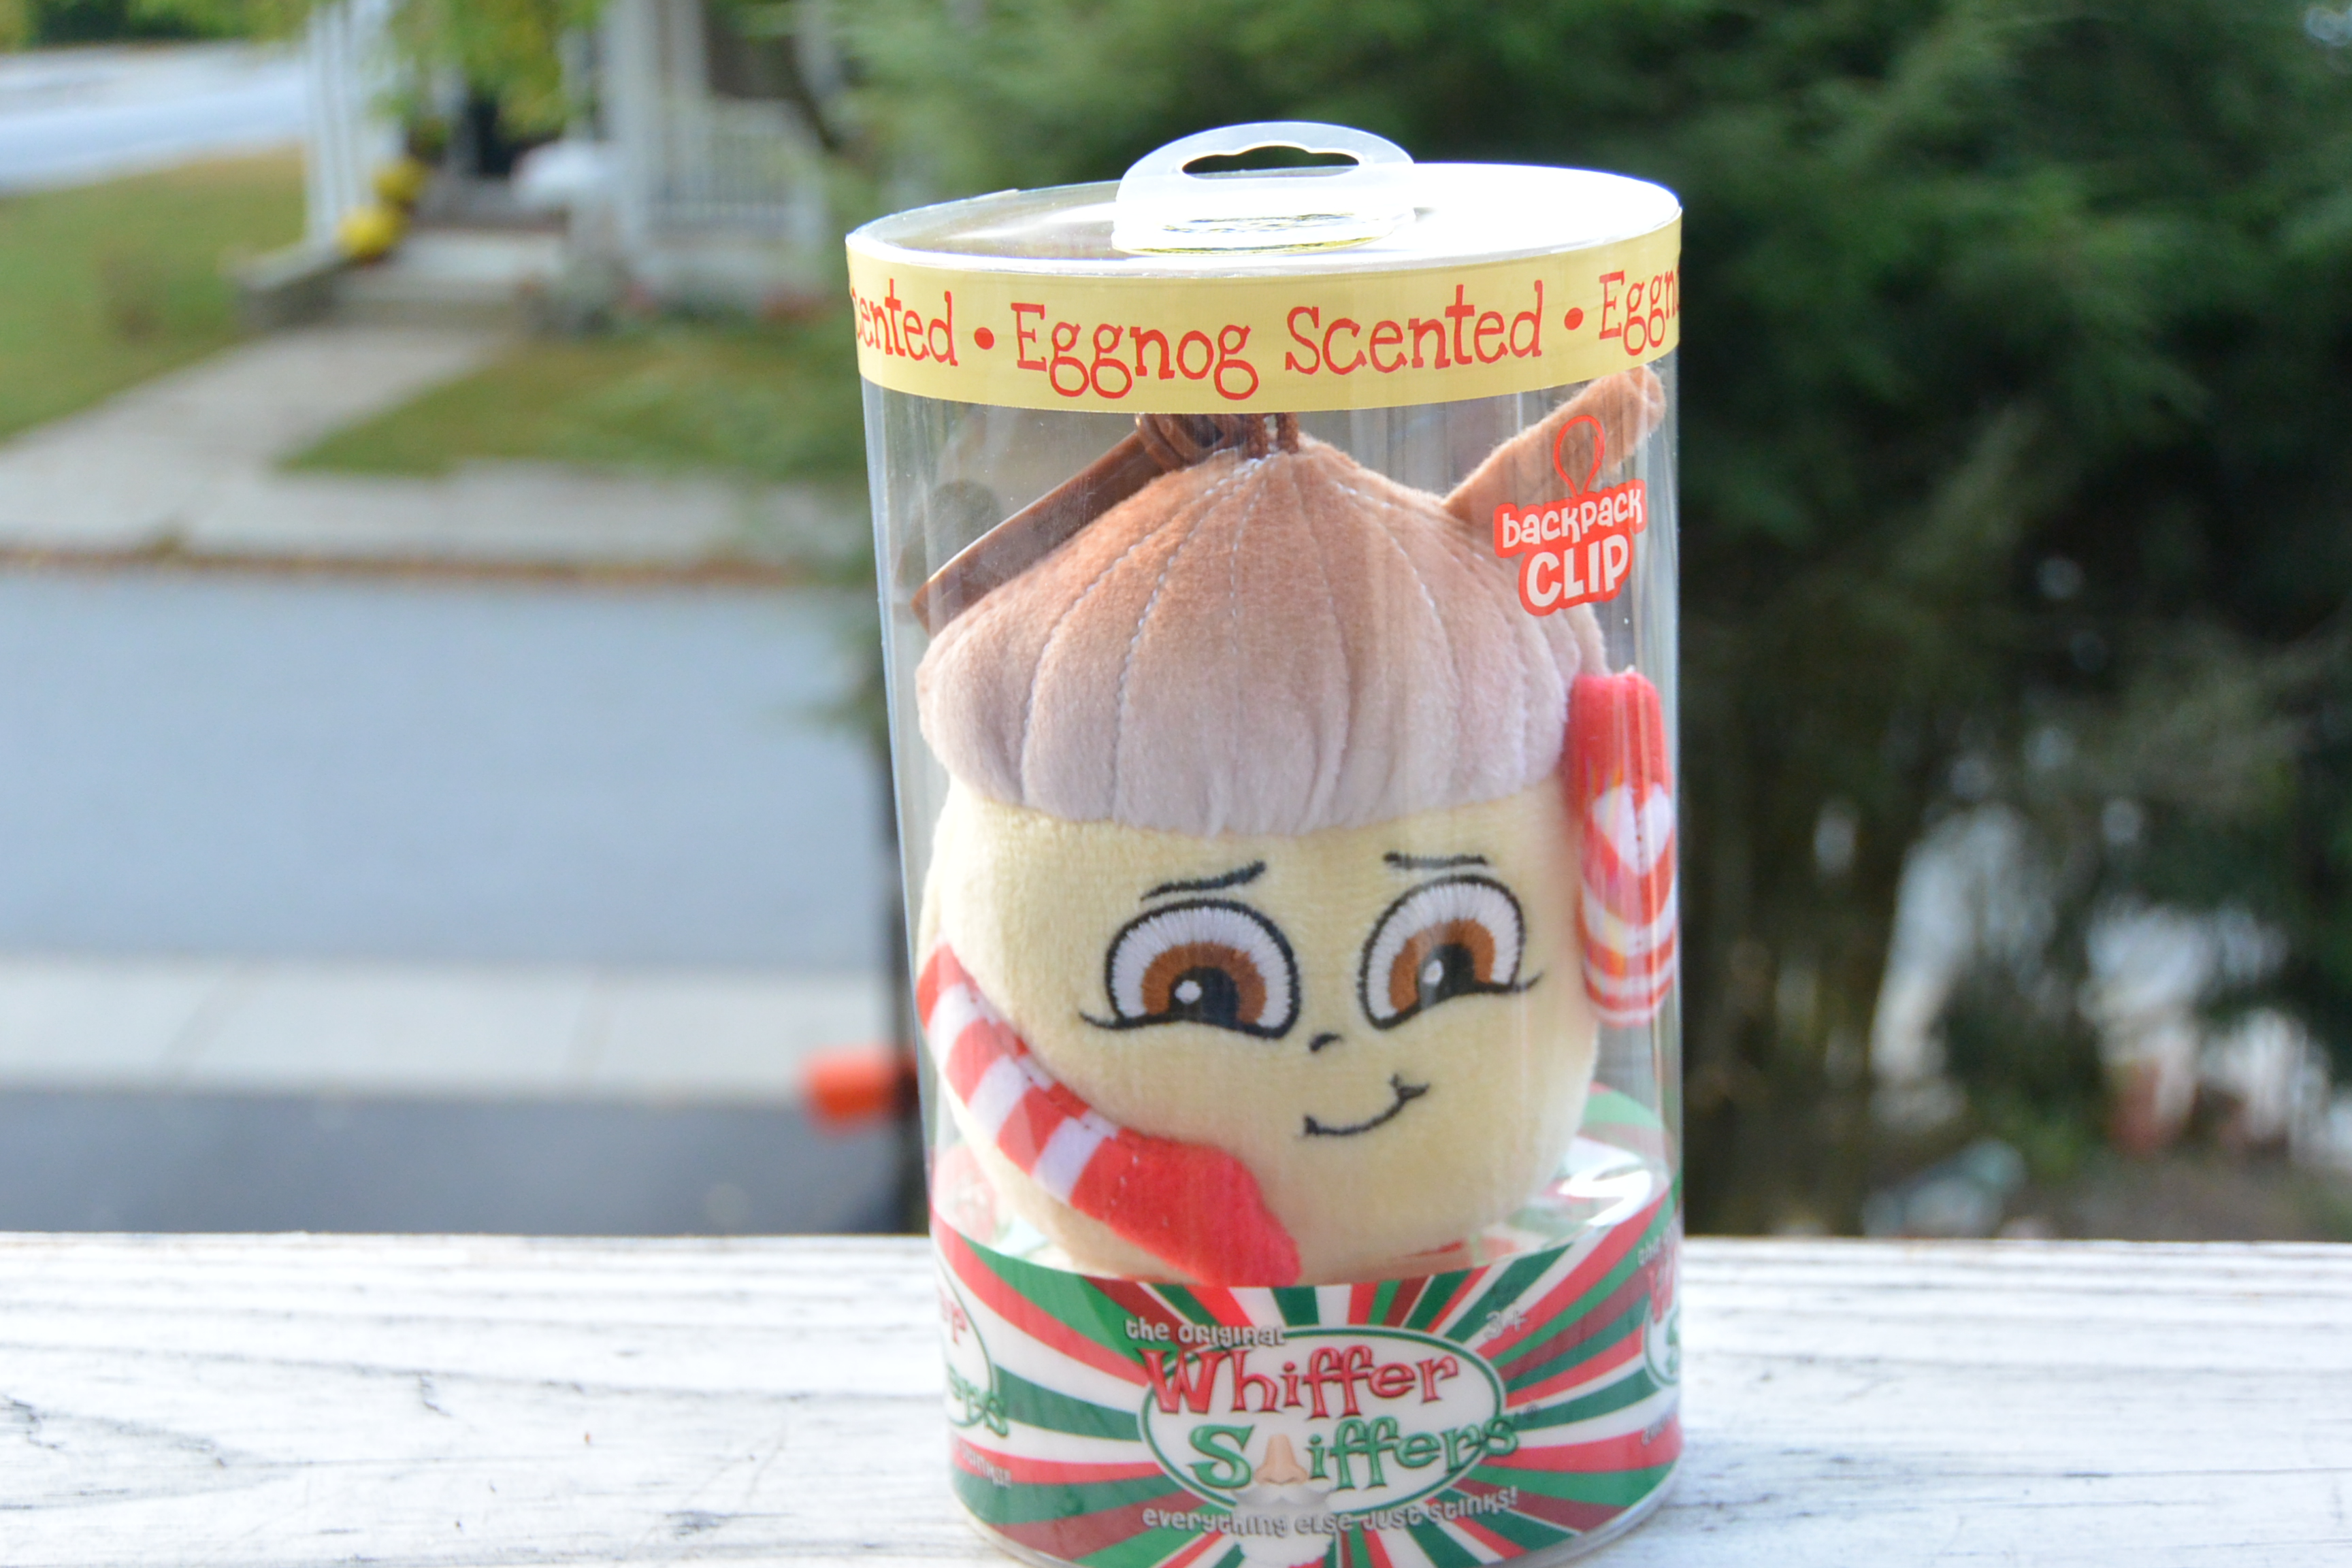 Ed Nog Eggnog Scented Series 5 Scented Plush Backpack Clip By Whiffer Sniffers 